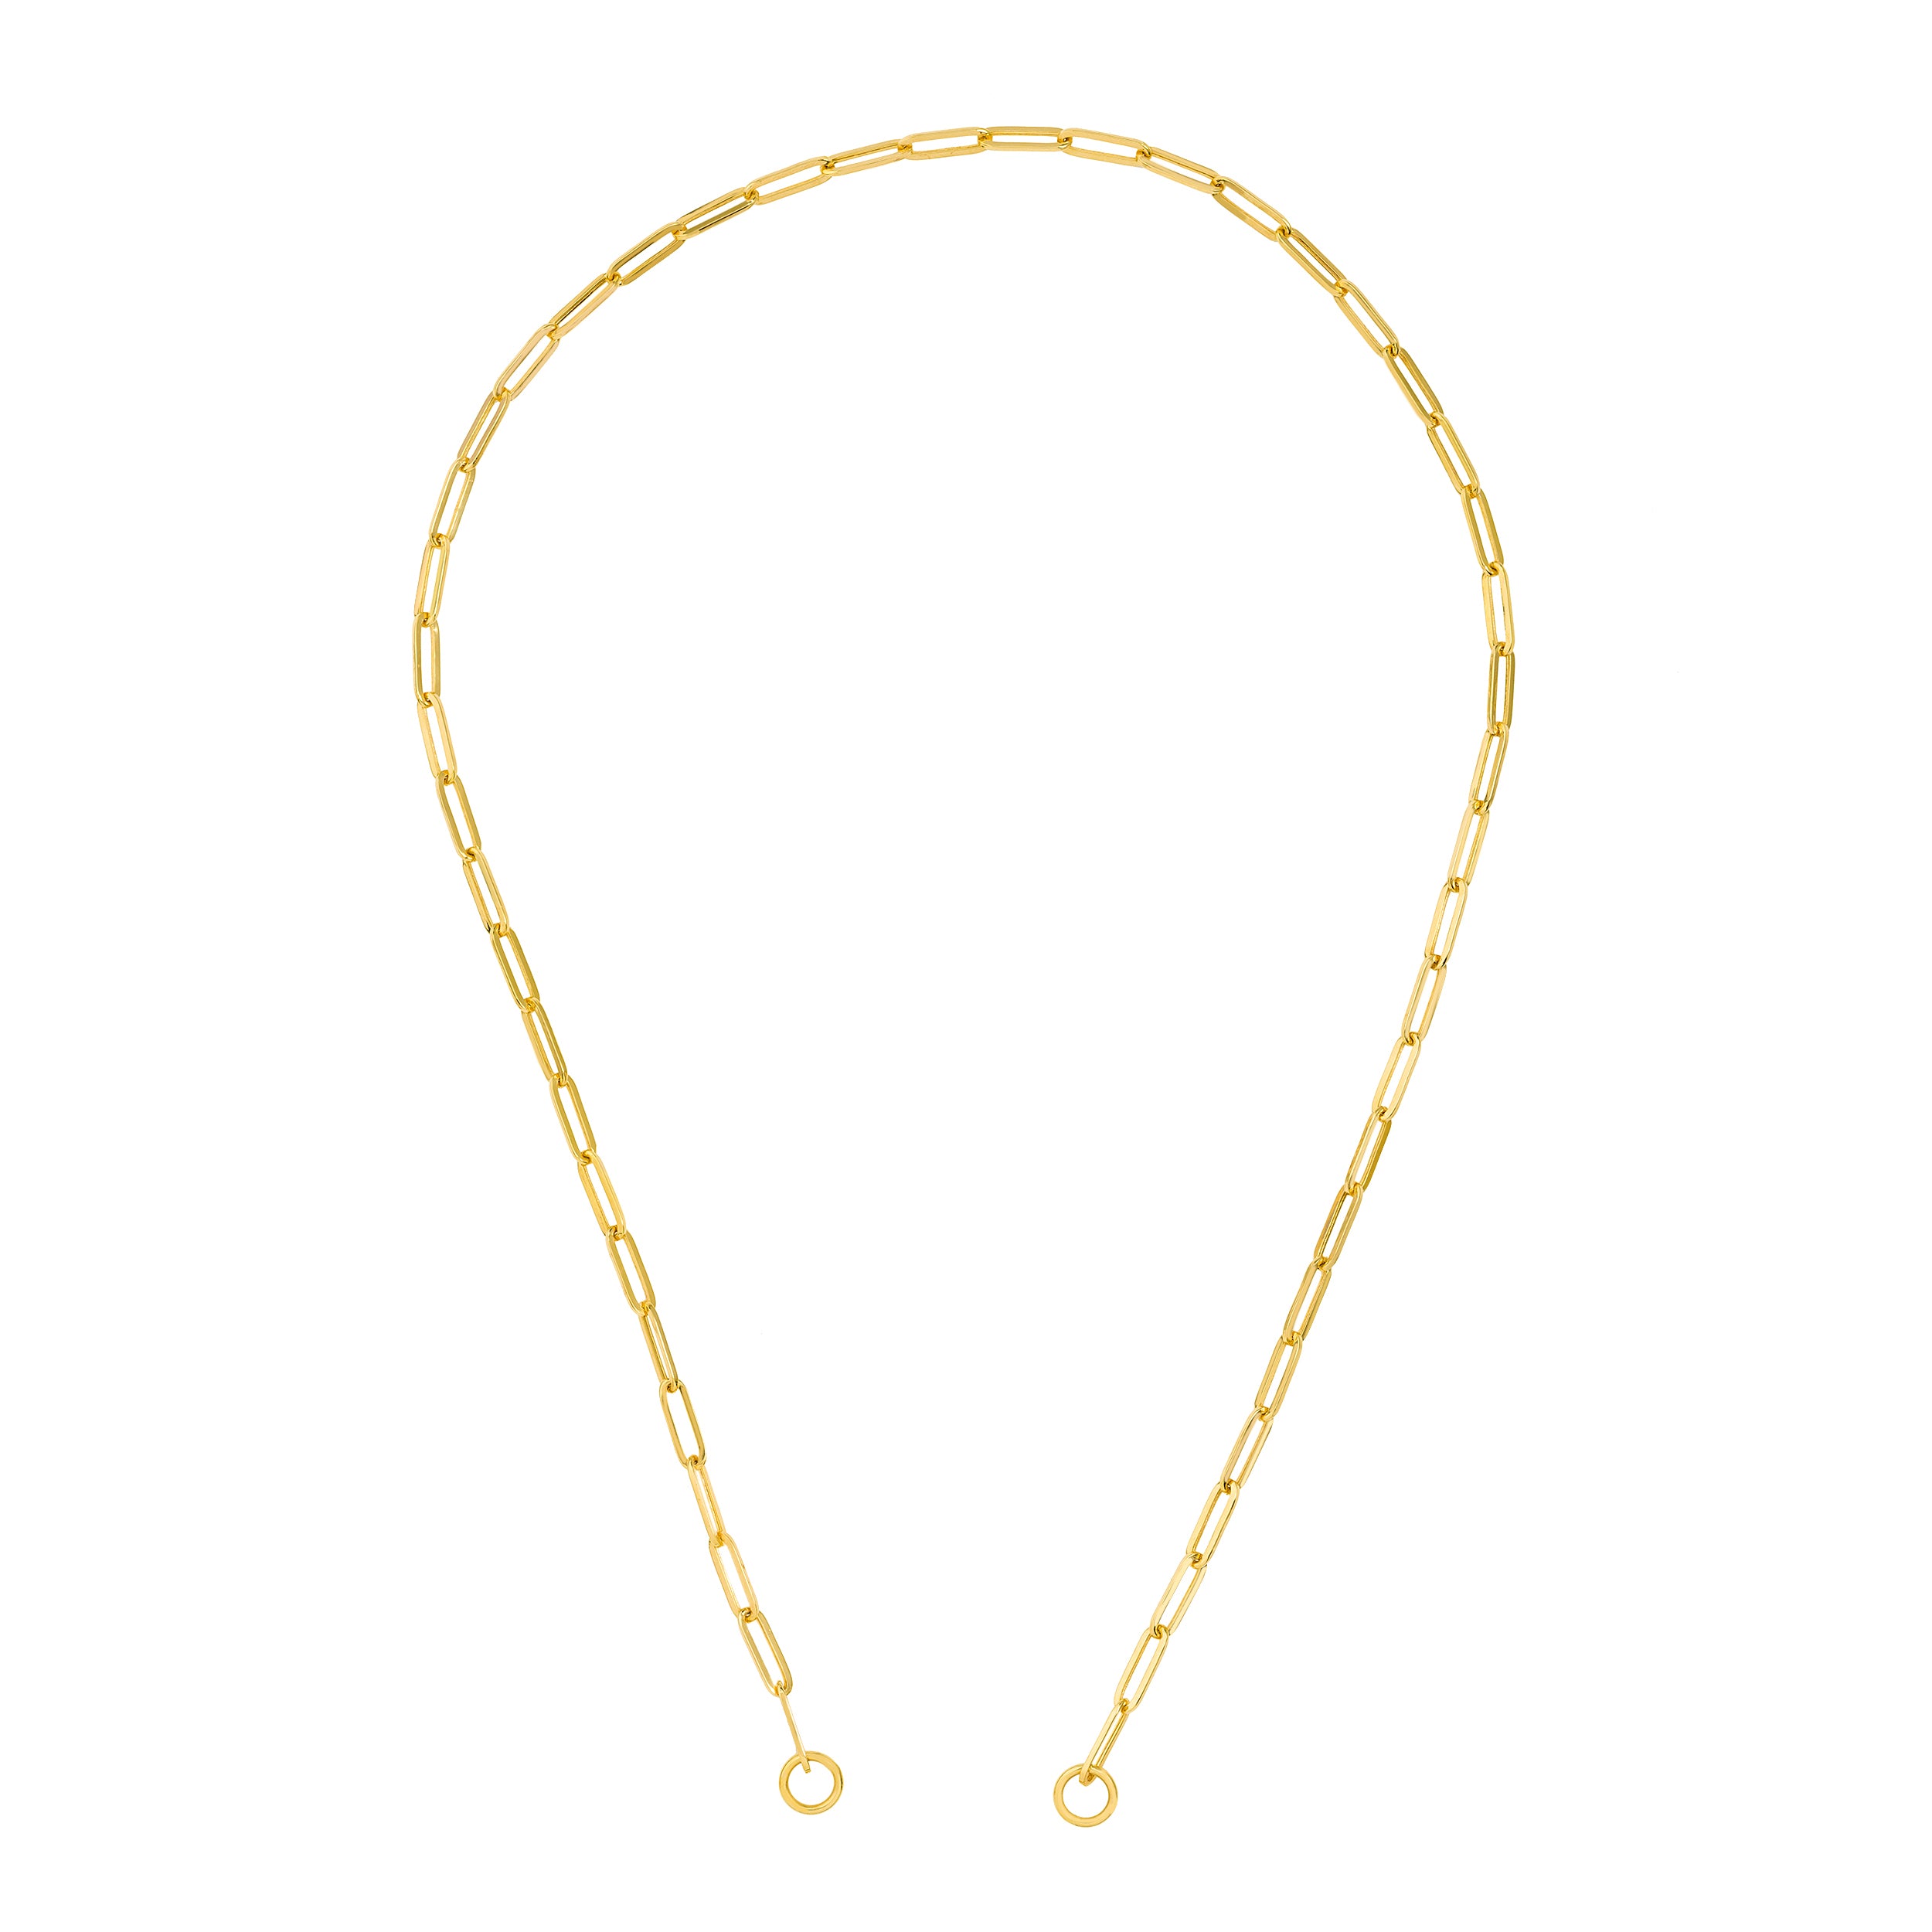 14K Yellow Gold Paper Clip Link Split Chain with End Rings for Lariat Y Necklace Bracelet Anklet Push Clasp Lock Connector Bail Pendant Charm Hanger